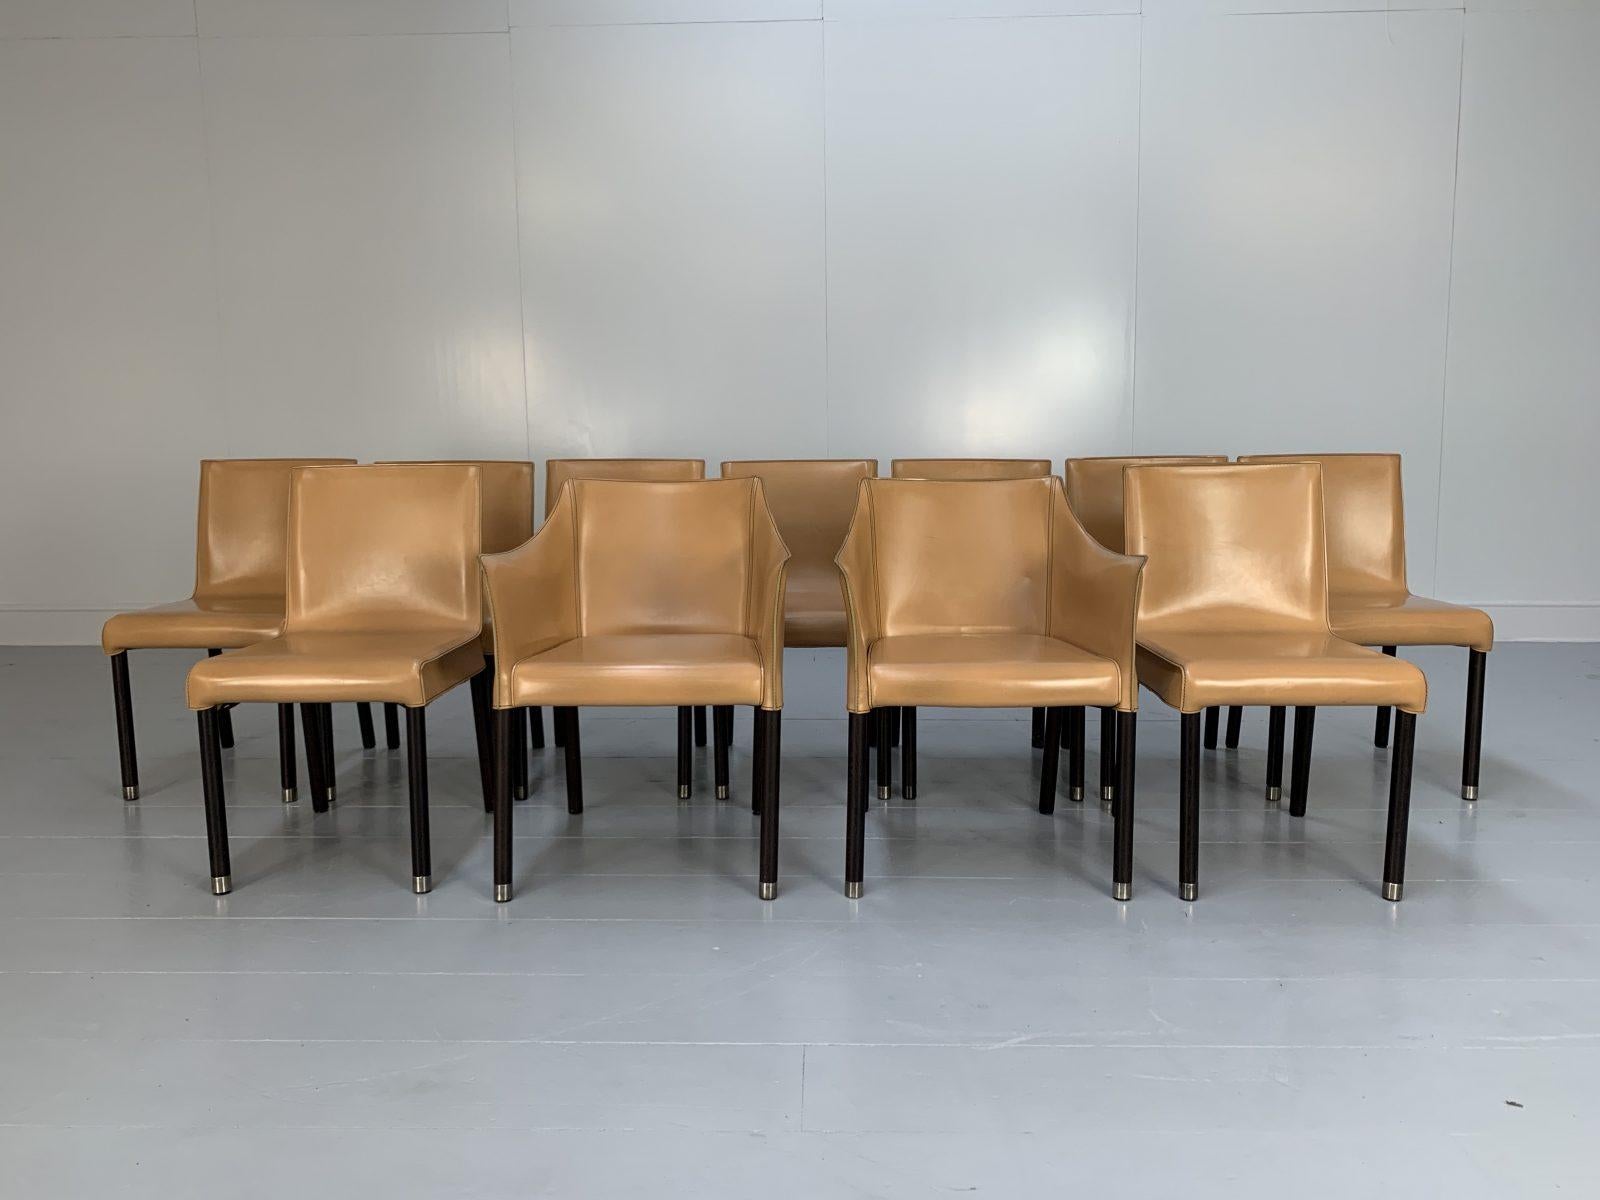 This is an ultra-rare opportunity to acquire what is, unequivocally, the best of the best, it being a most spectacular, immaculate, beautifully-presented 12-piece suite of “Cap” Dining Armchairs (consisting of 10 chairs and 2 carvers) all dressed in